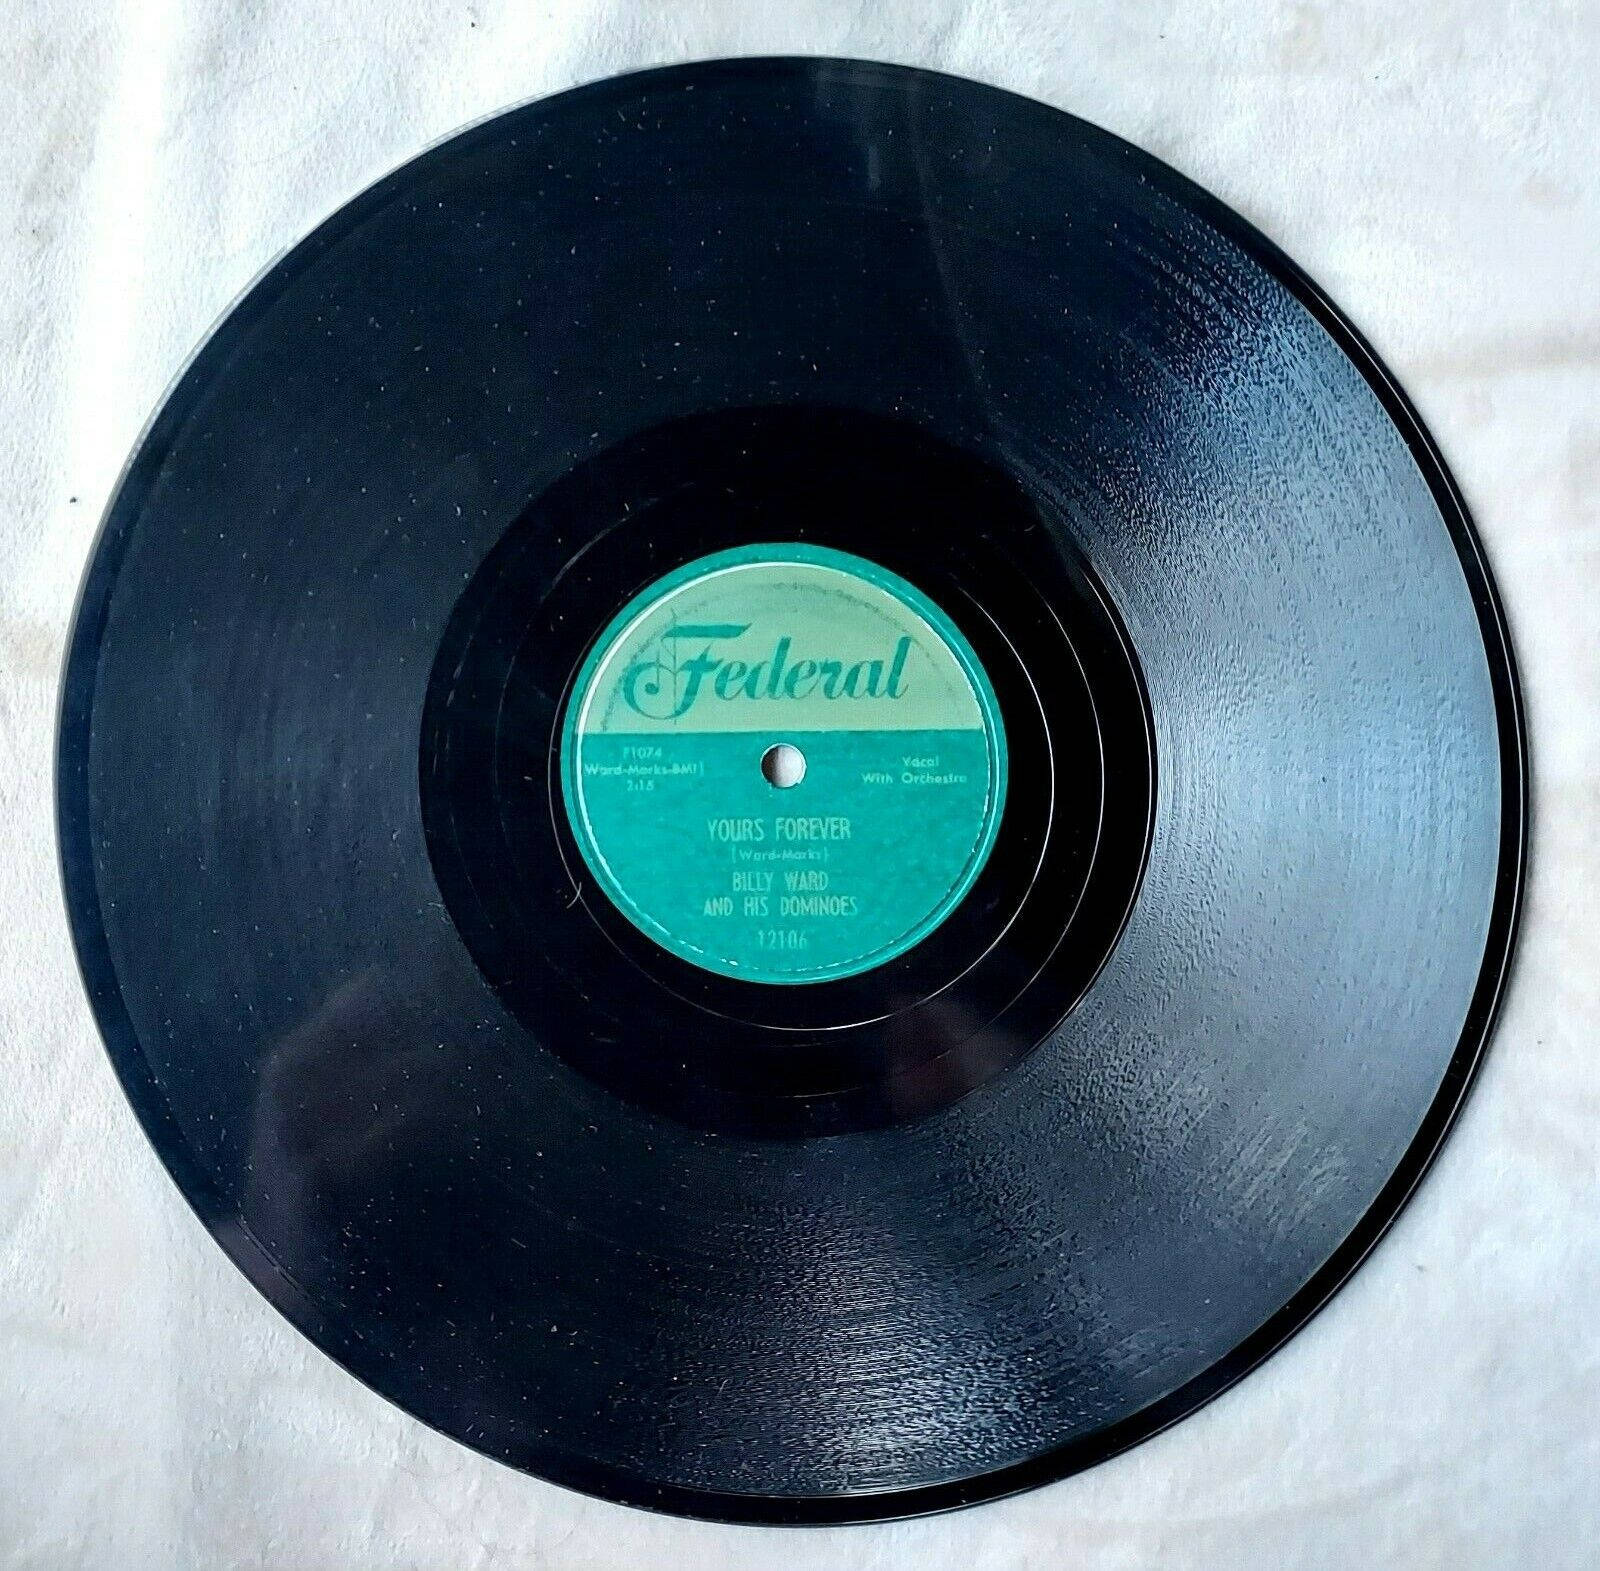 Vintage Black Vinyl Record - Billy Ward and The Dominoes Wallpaper